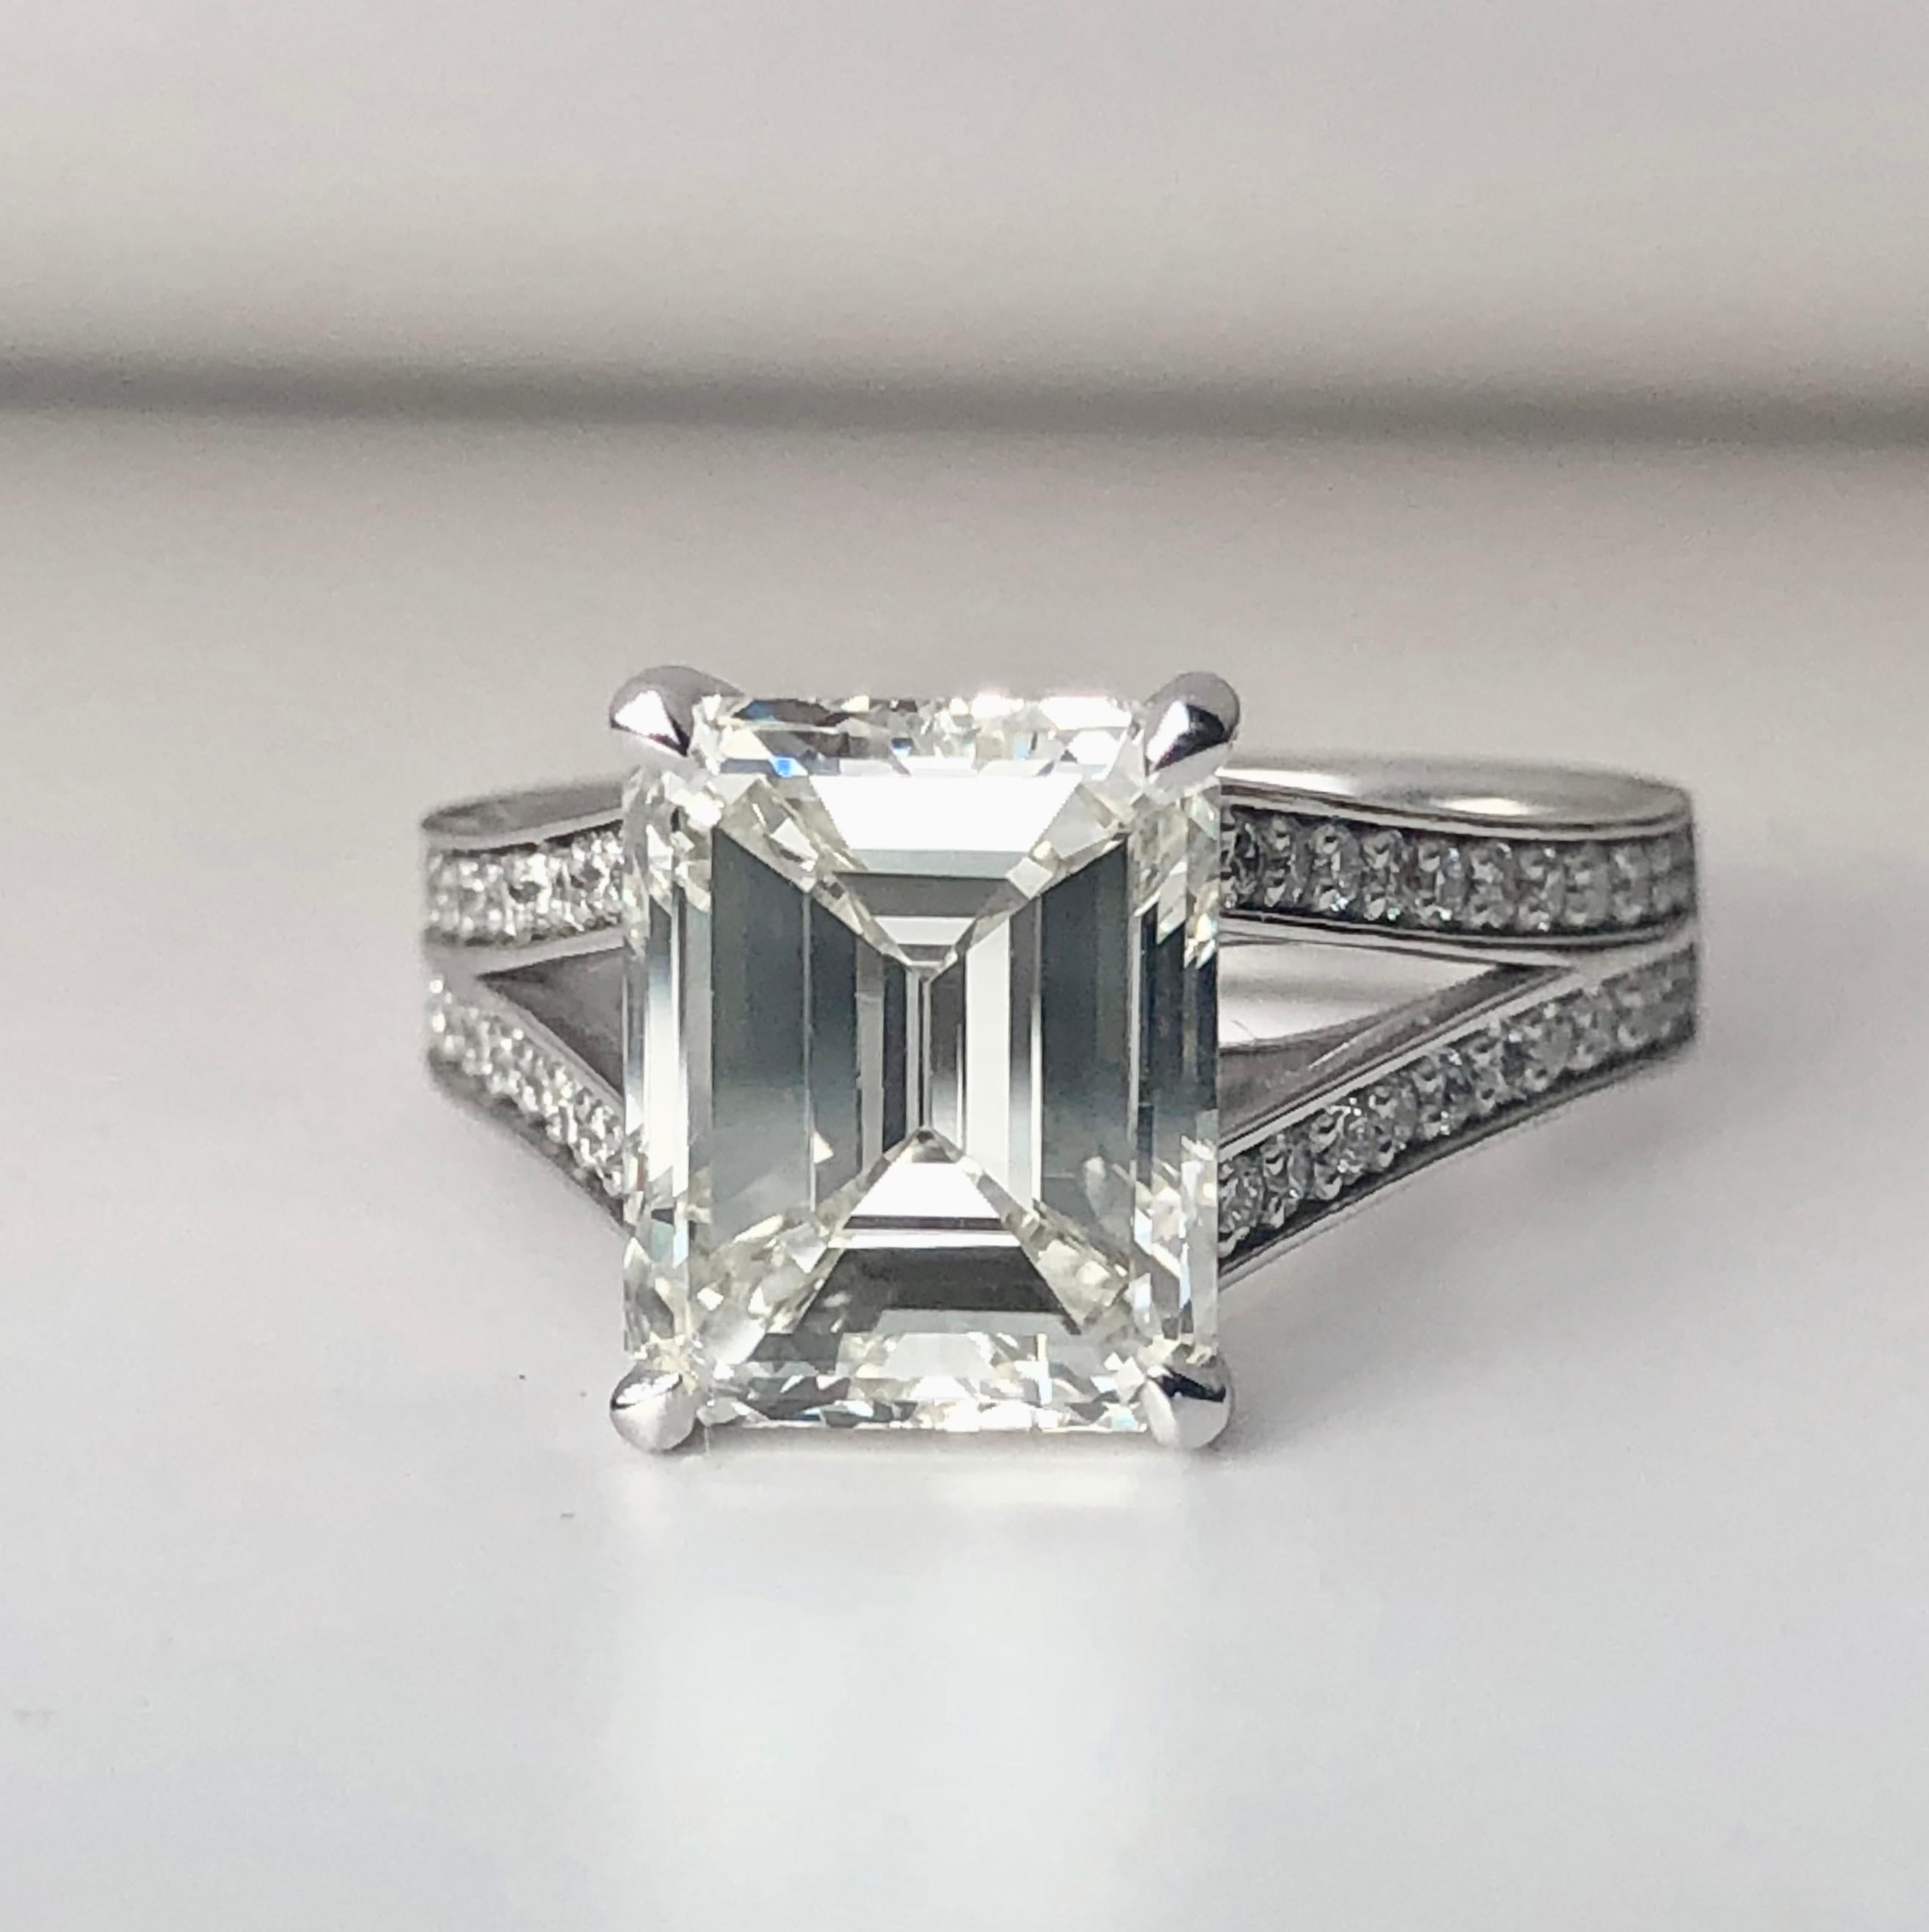 Emerald Cut Diamond Ring

3.75ct Principal Diamond J Colour VS Clarity - EGL Certificate 

18K White Gold Mount With Phoenix Talon Claws And Diamond Set Bifurcated Split Shank 

This Piece Is Newly Constructed And Is A Size M - This Can Be Altered